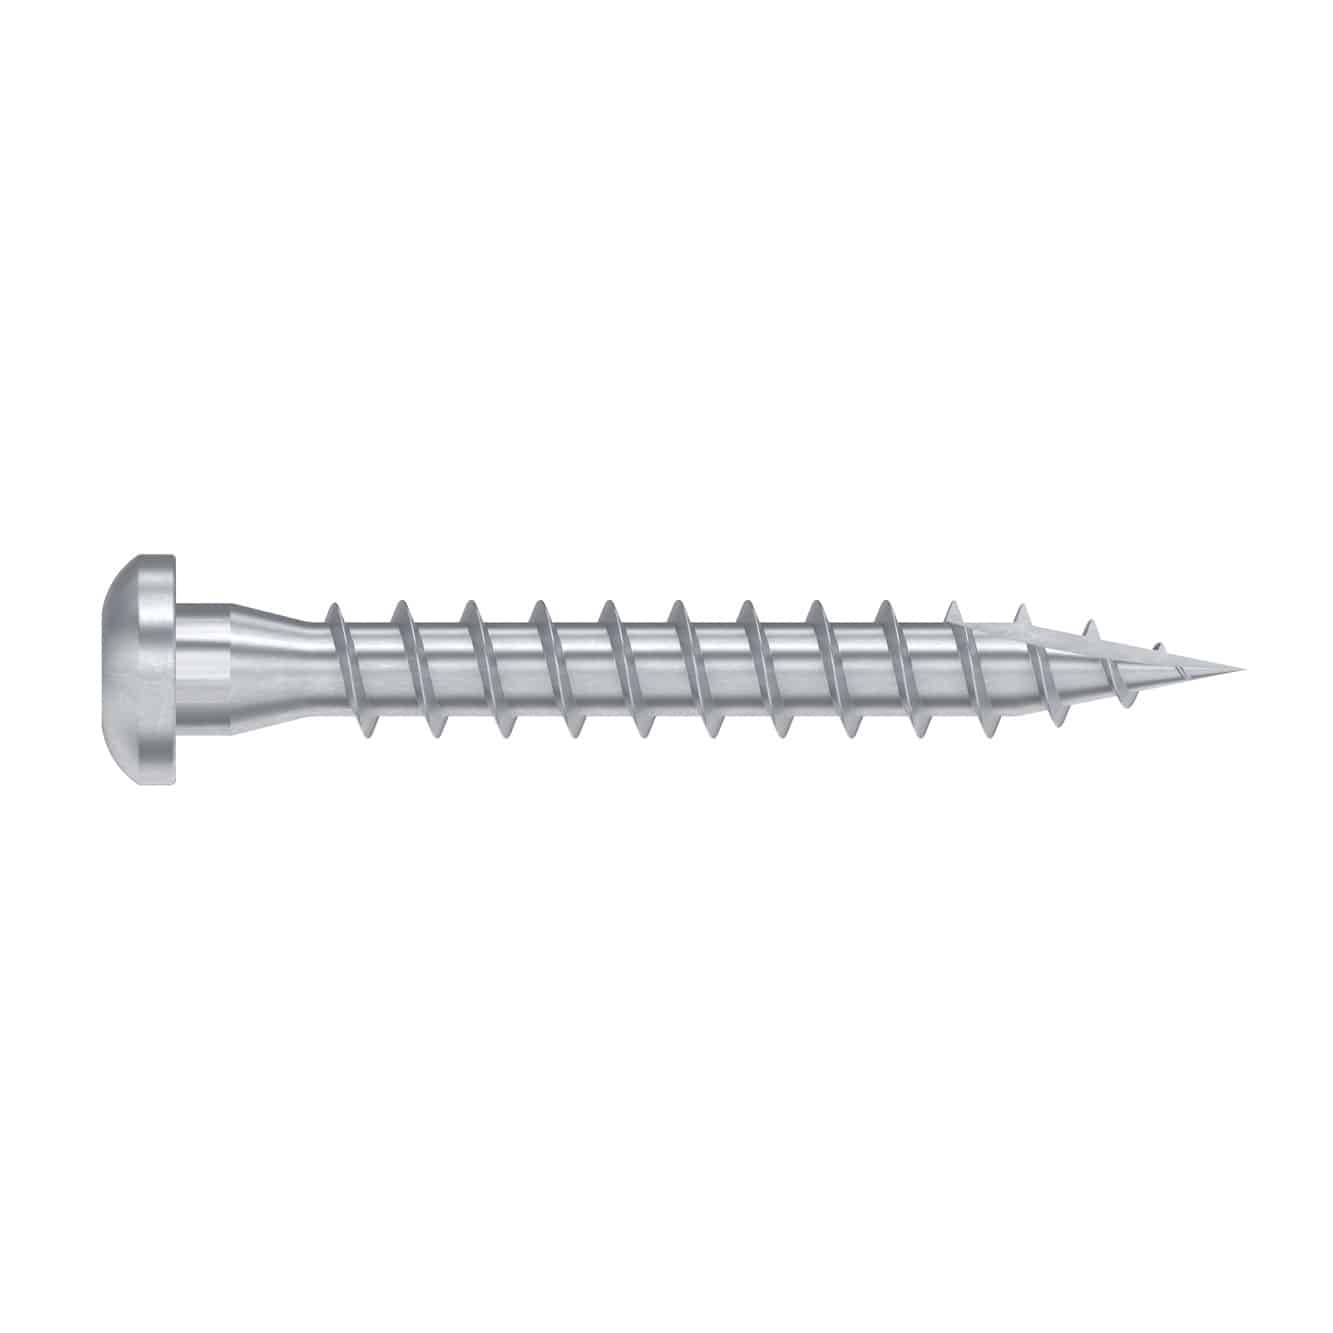 Simpson Strong-Tie CSA 5.0 x 40/1 Connector Screws (Sold individually)